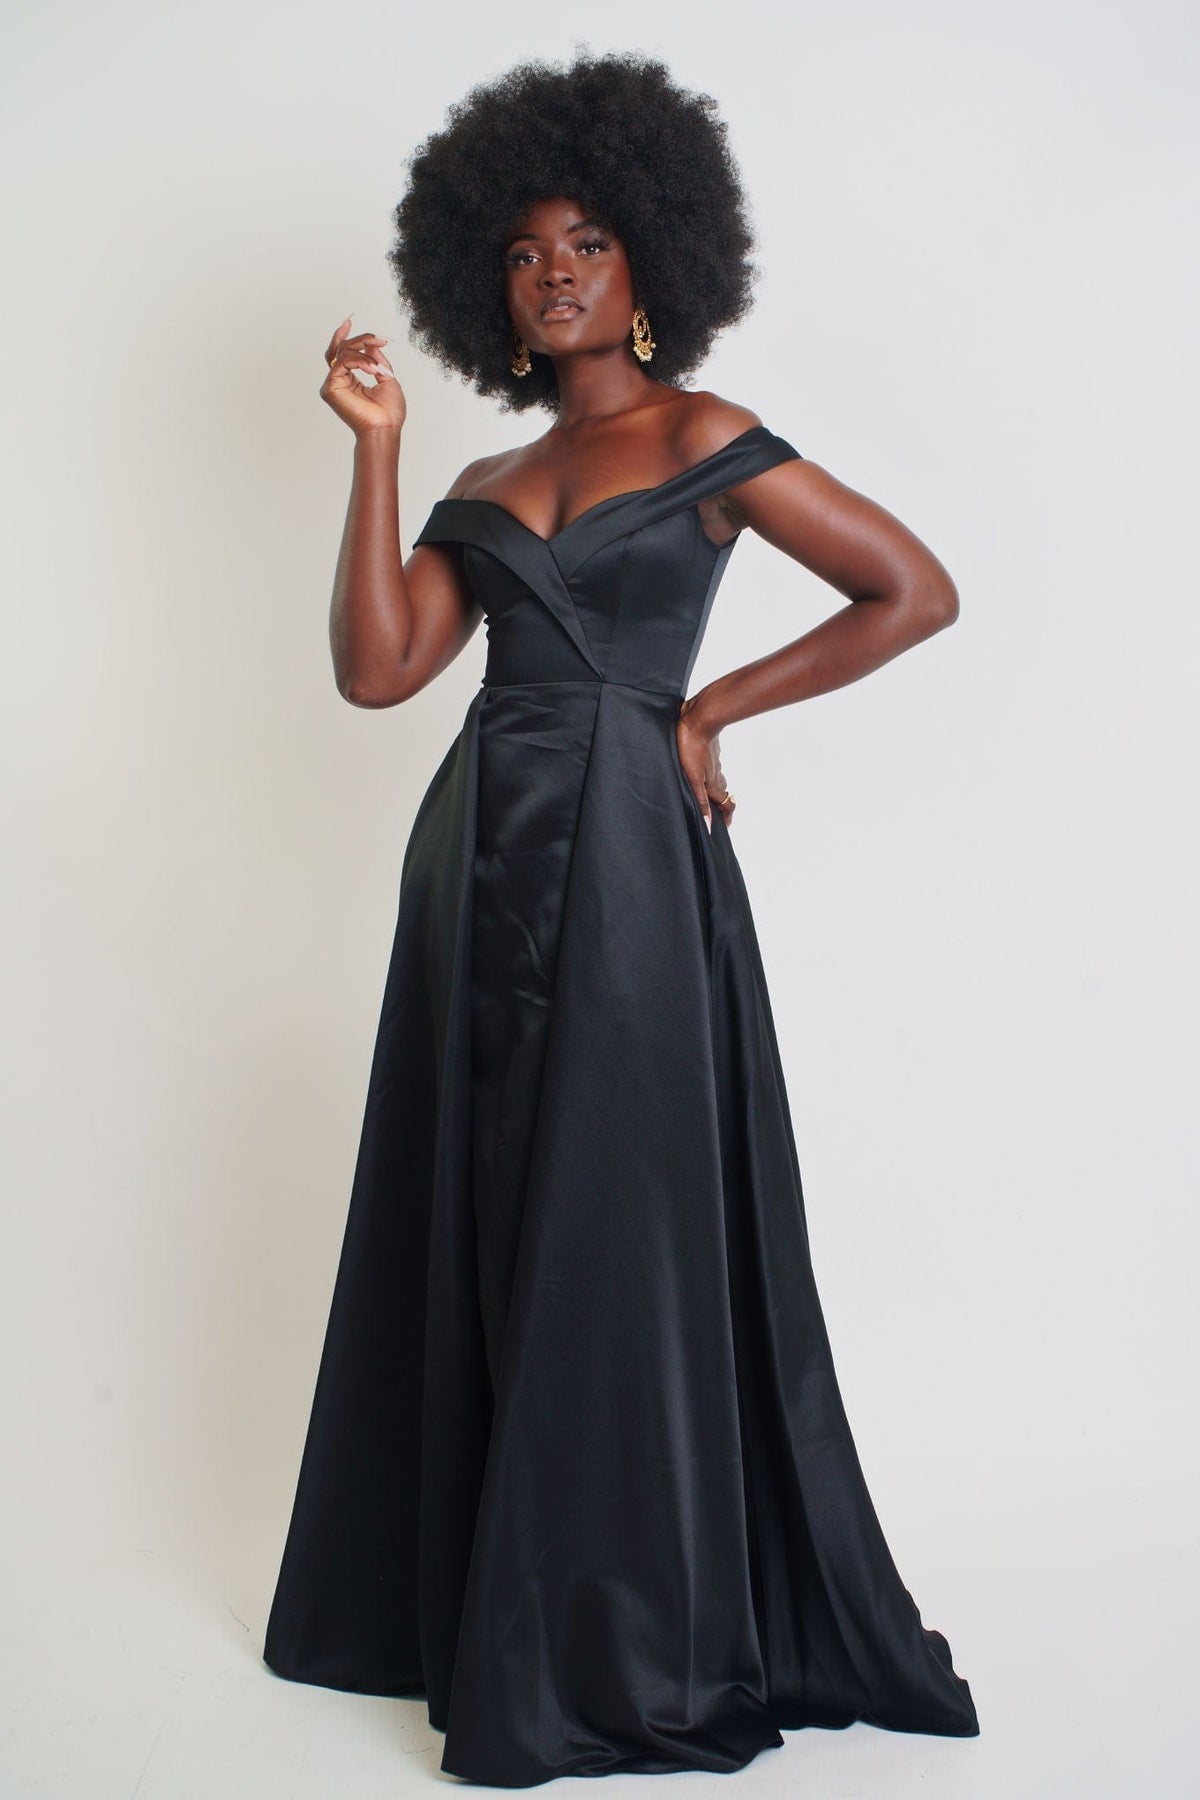 Find Your Inner Diva Gown (Black)